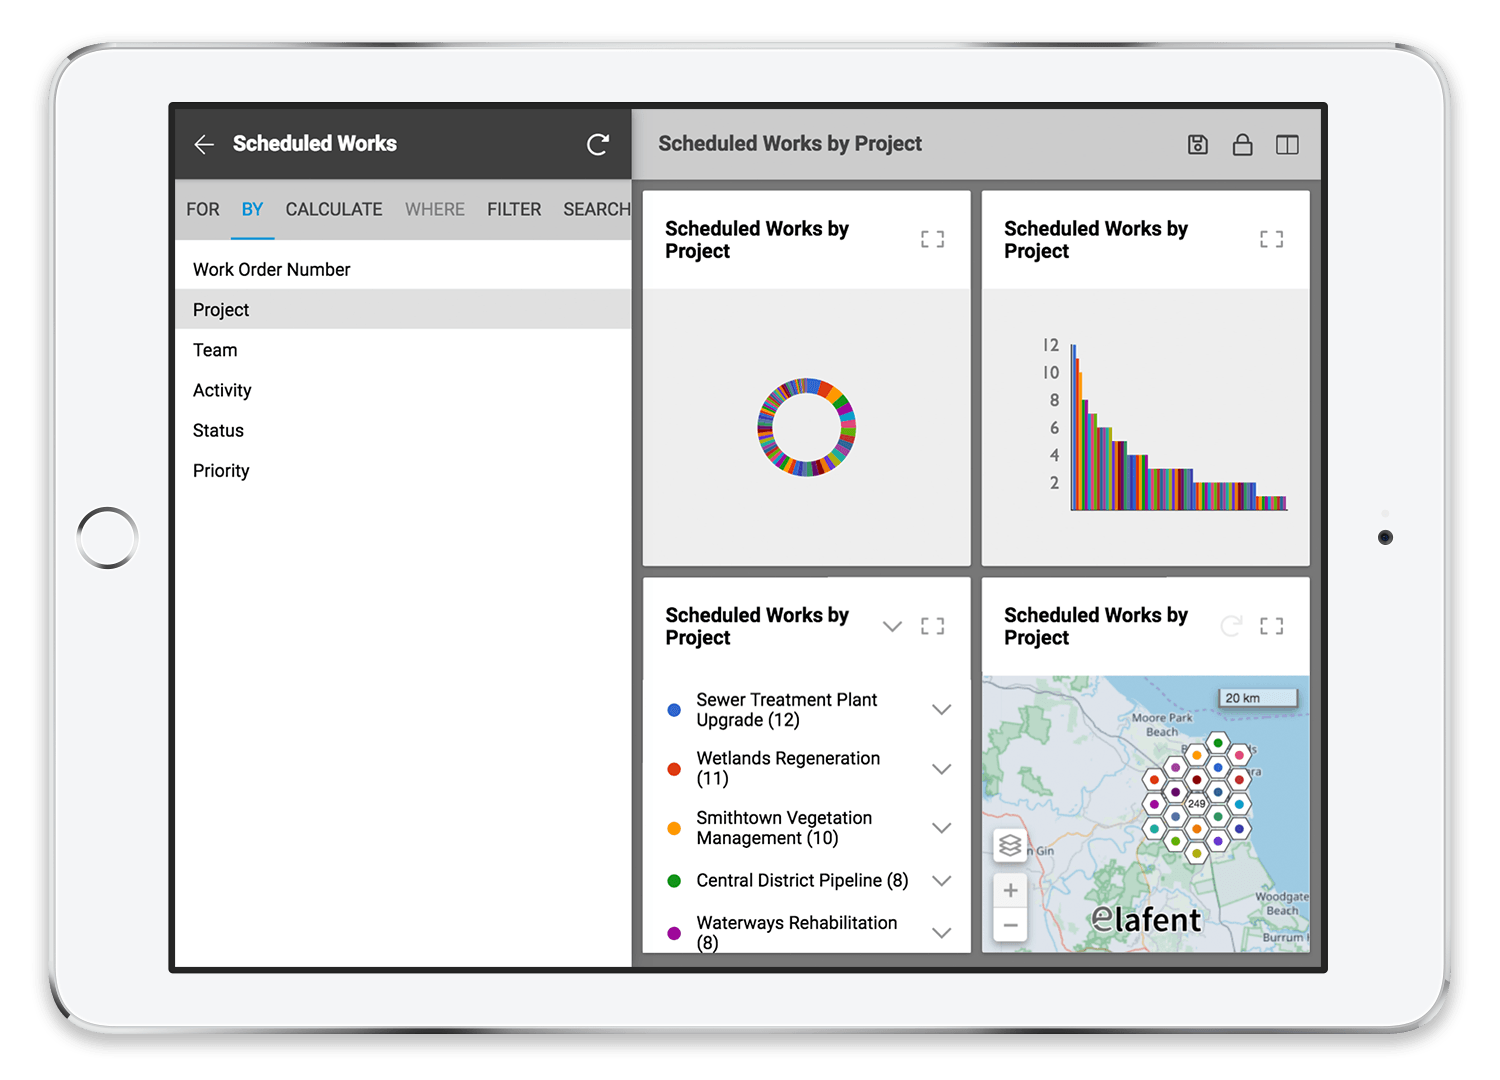  Scheduled works activity data can be visualised in a dynamic dashboard by “ Project " 